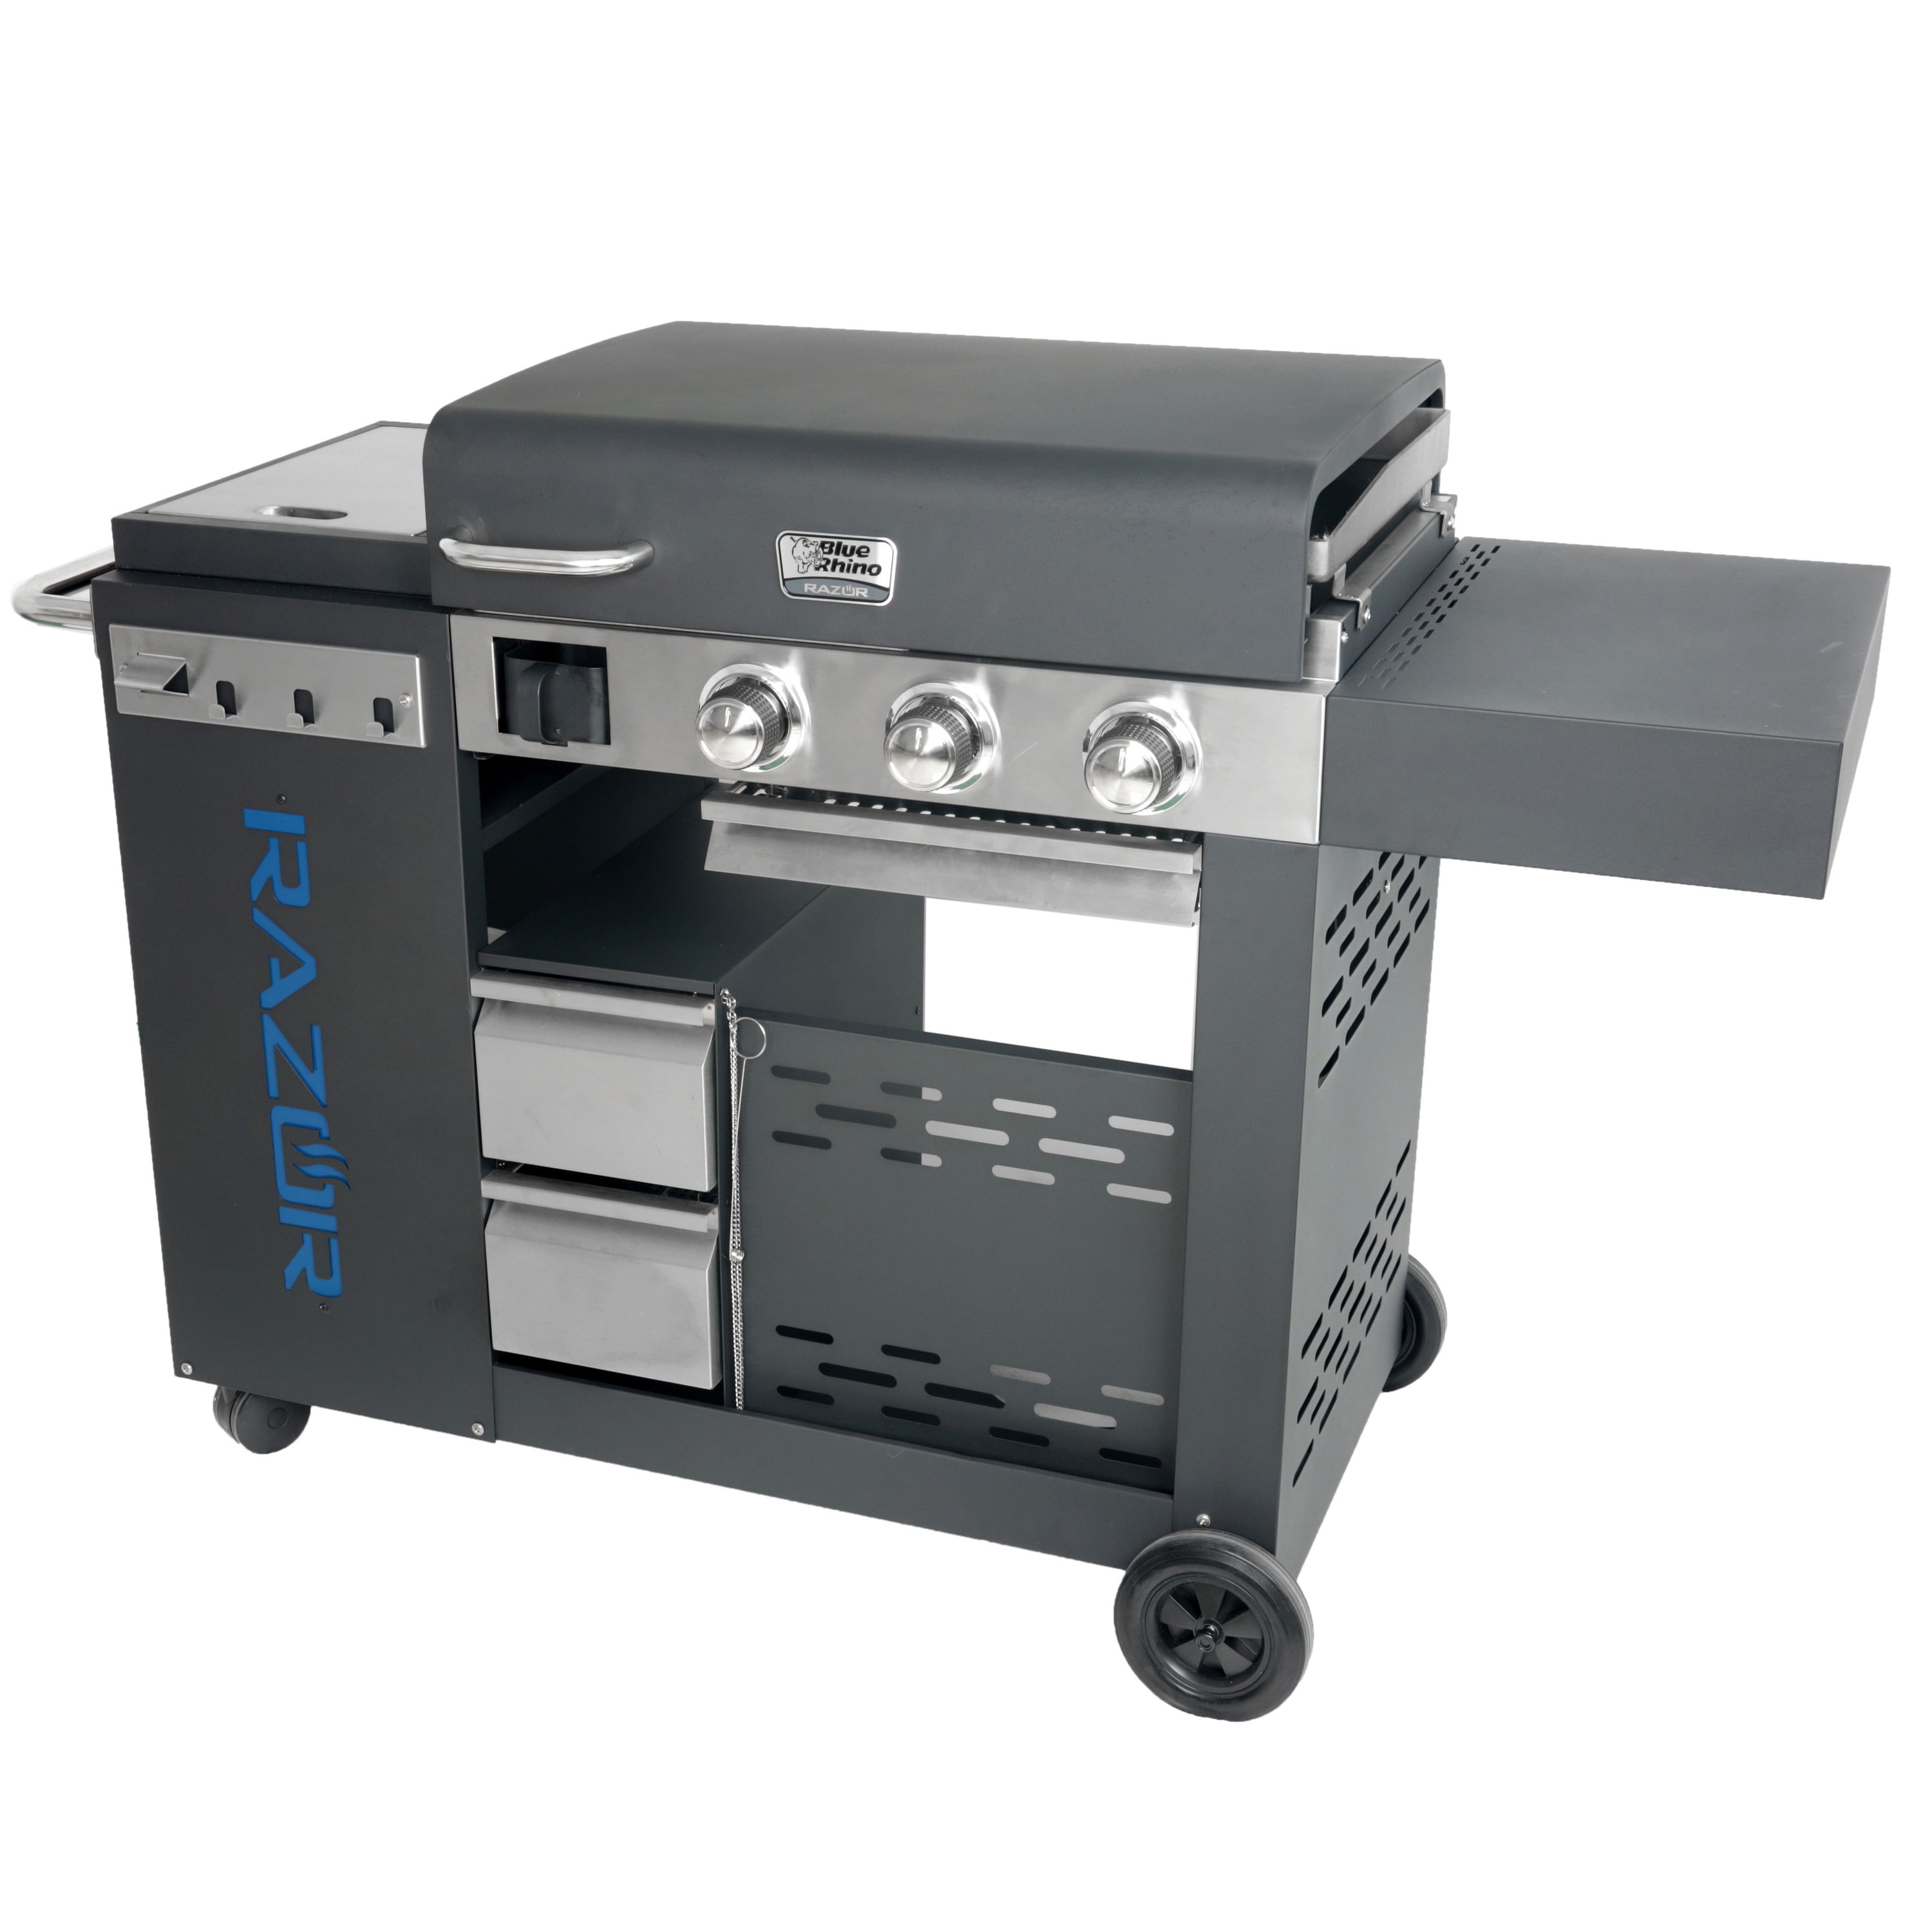 Rhino 3-Burner Liquid Propane Flat Top Grill in the Top department at Lowes.com